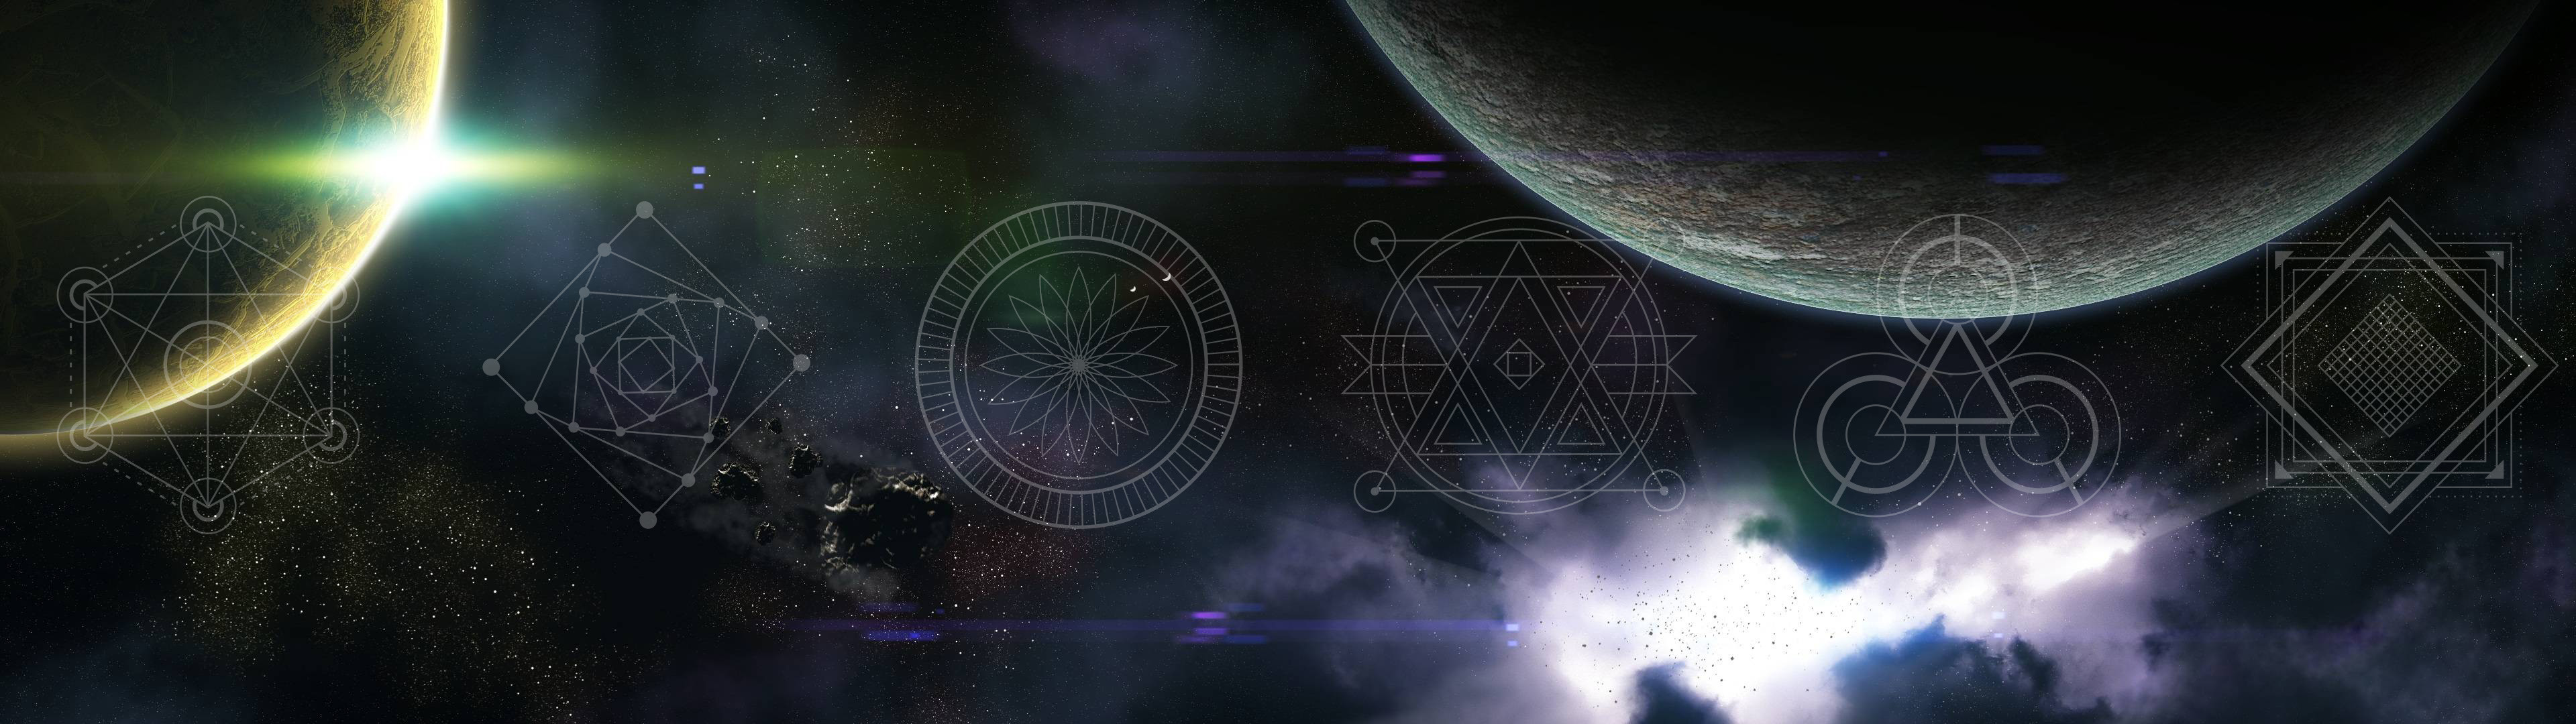 Sacred geometry and space wallpapers part1